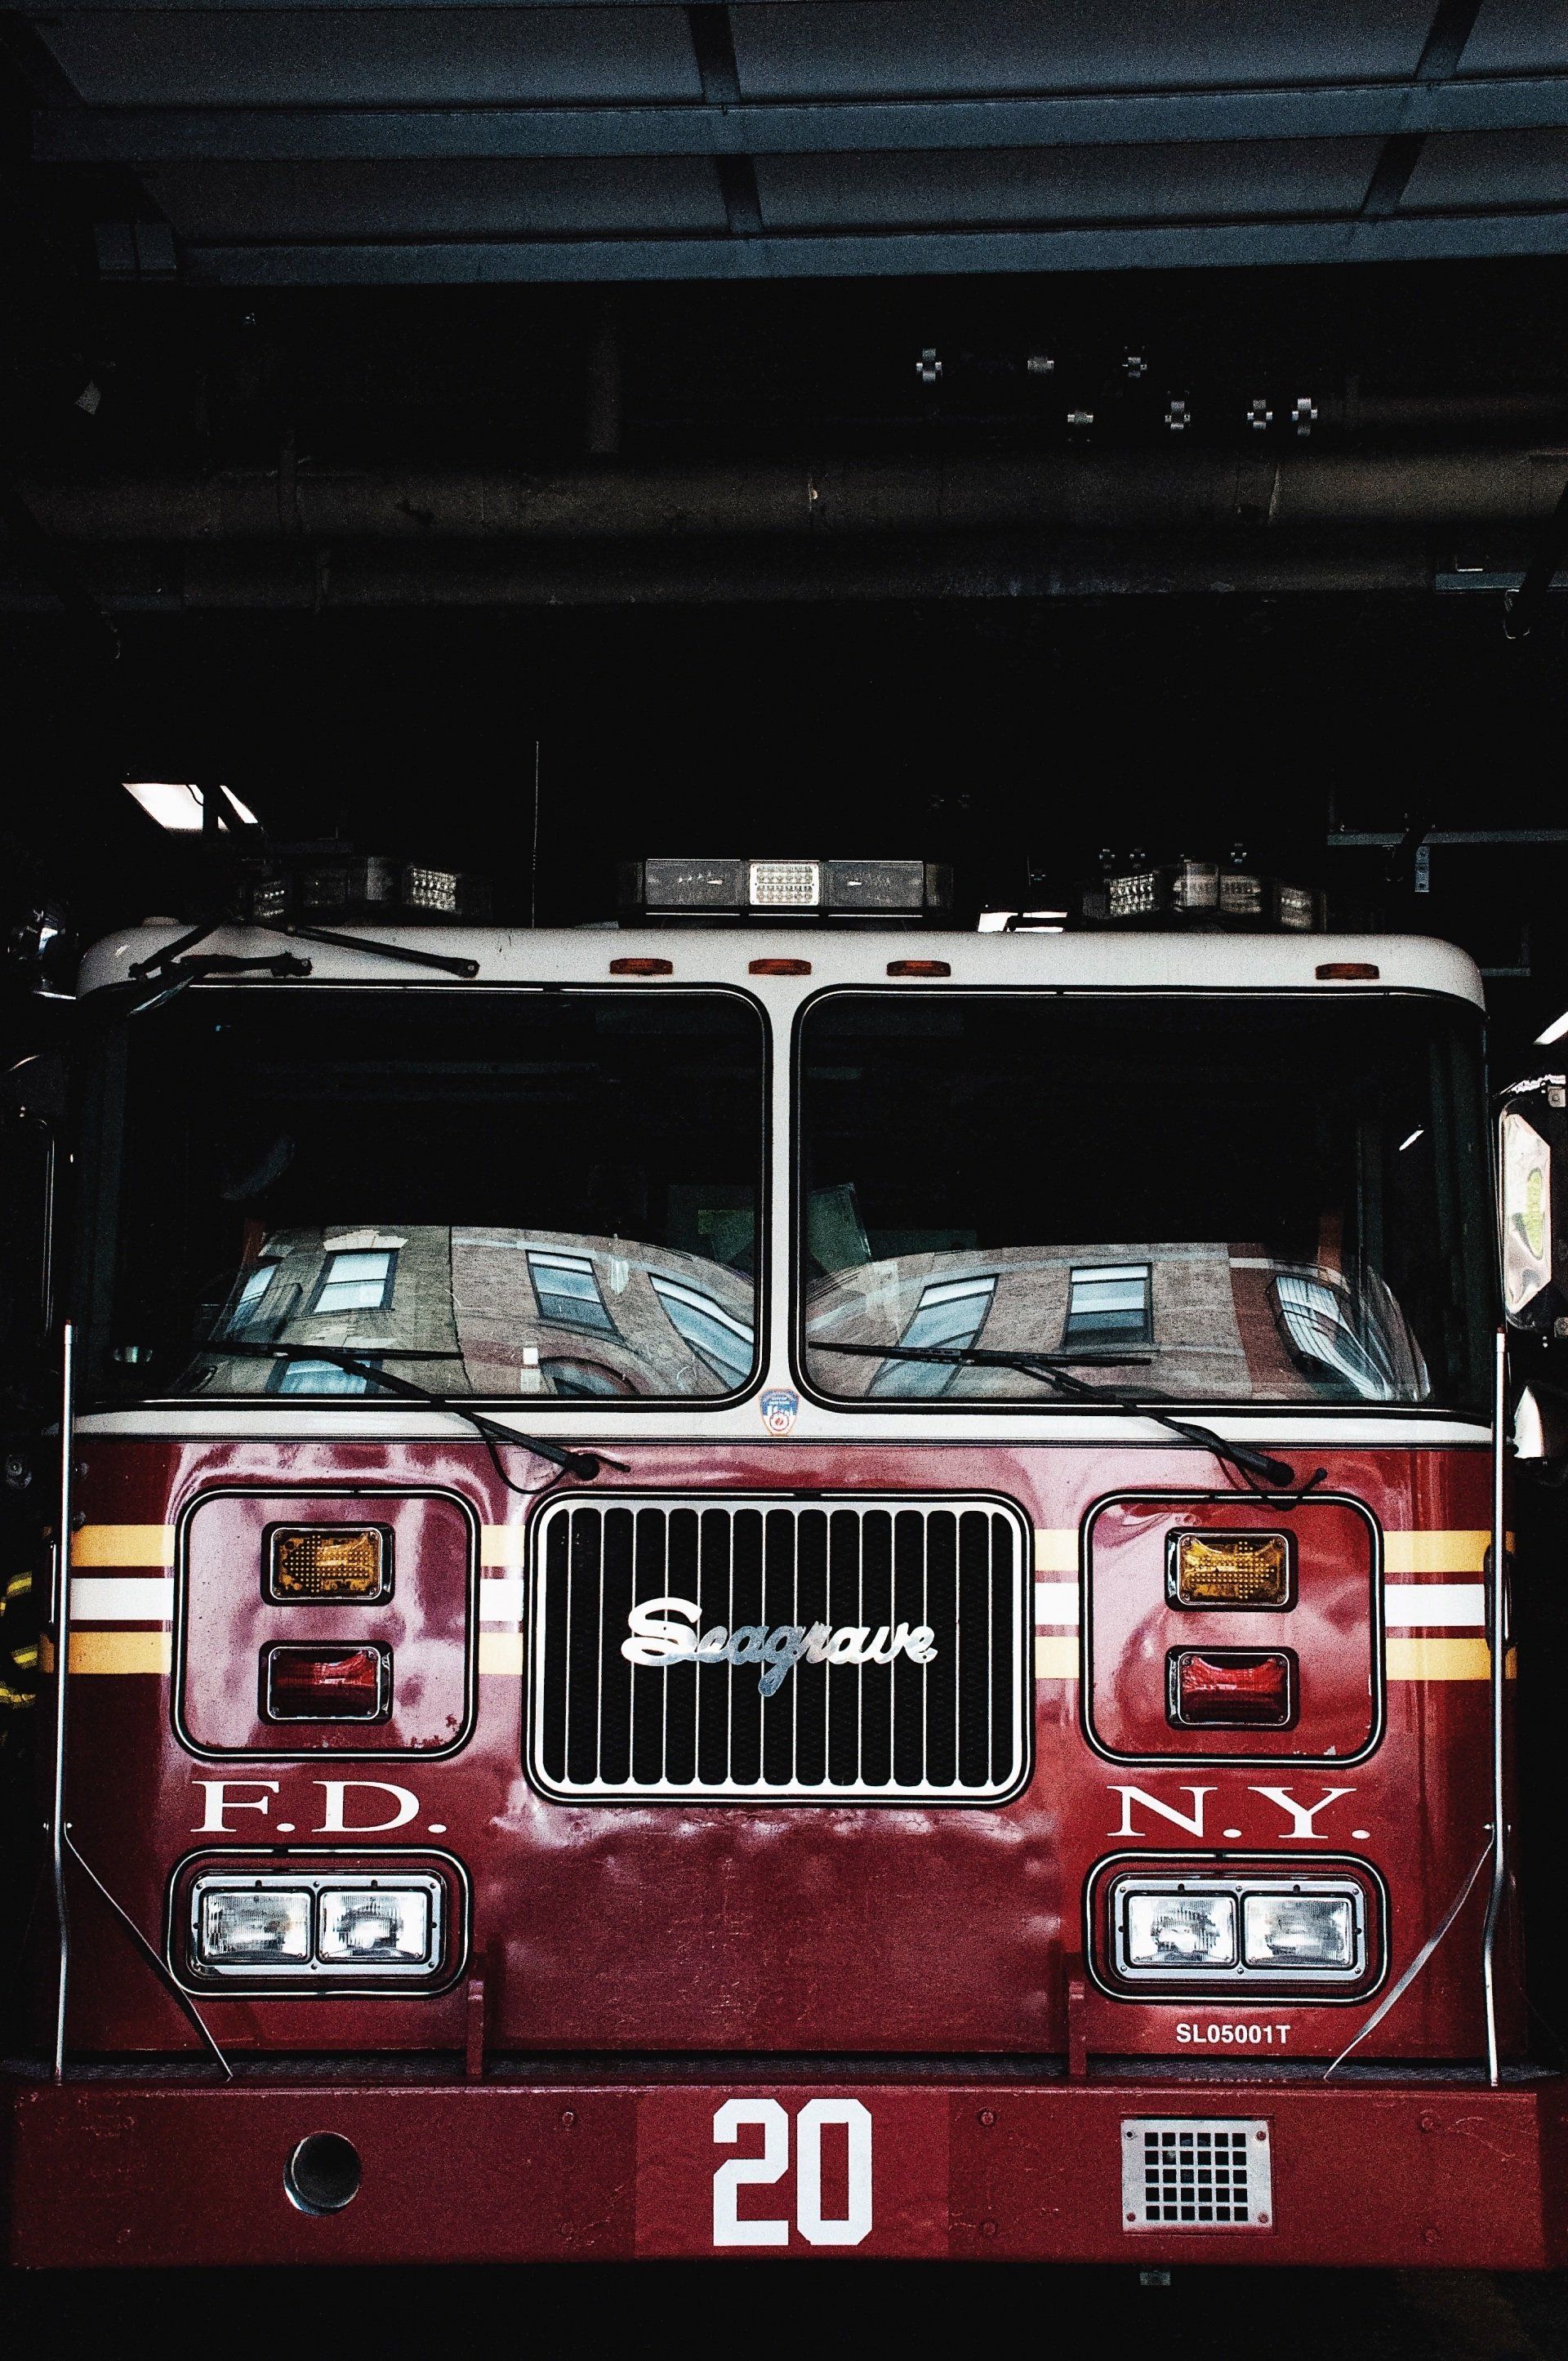 A red fire truck with the number 20 on the front